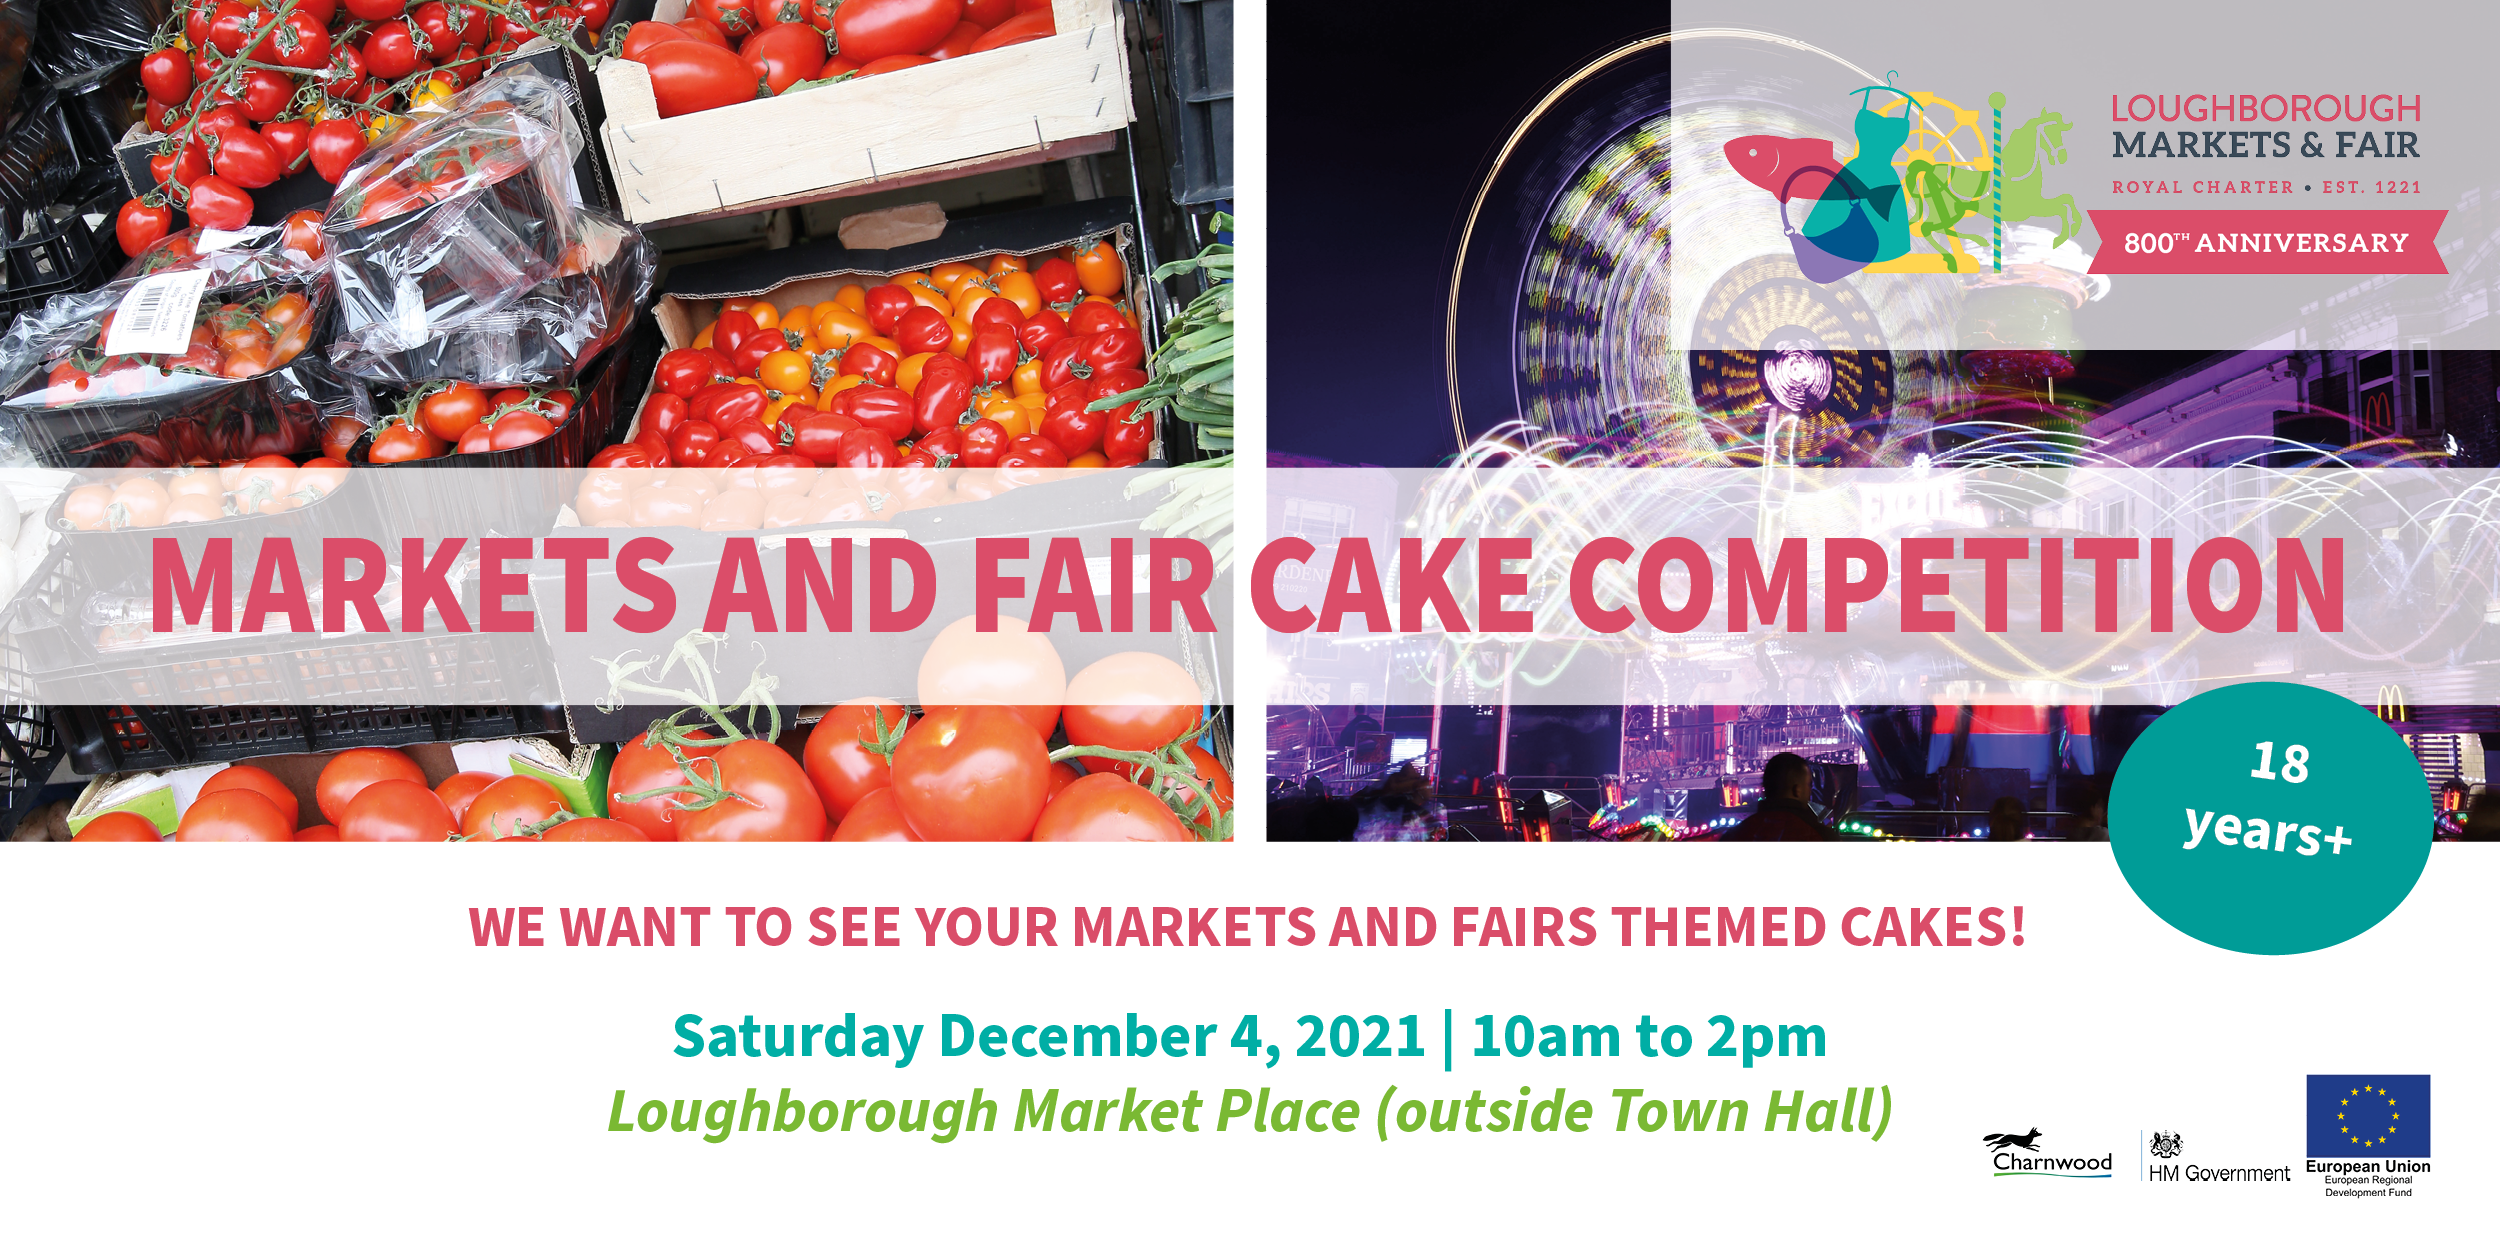 Market and Fair cake competition - Saturday December 4, 2021. At Loughborough Market (outside Town Hall) from 10am until 2pm.